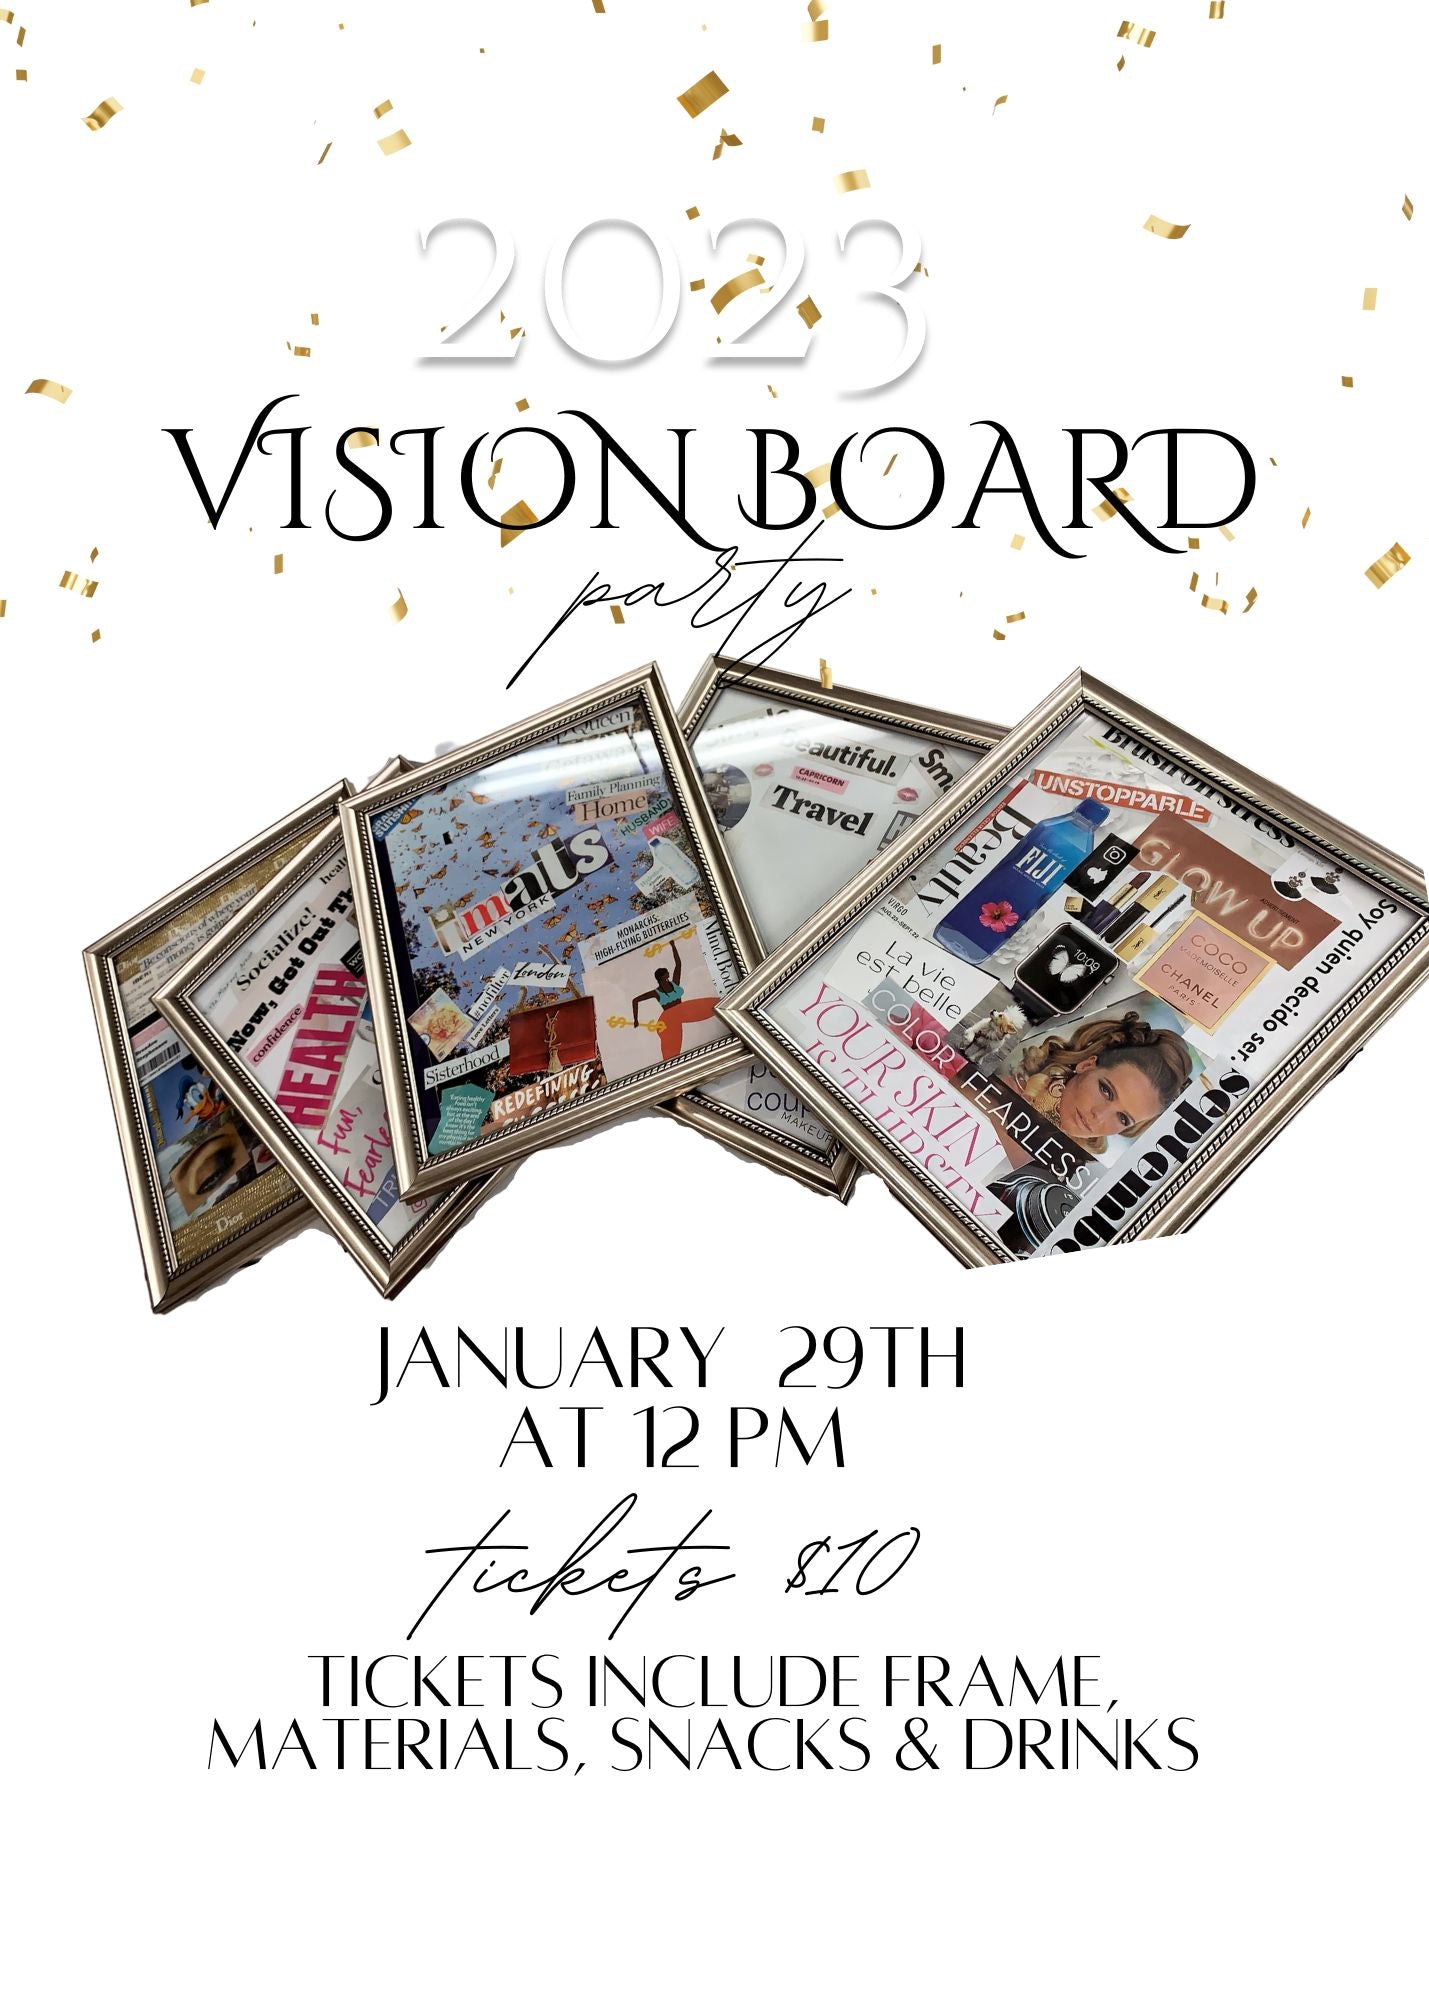 Vision board party